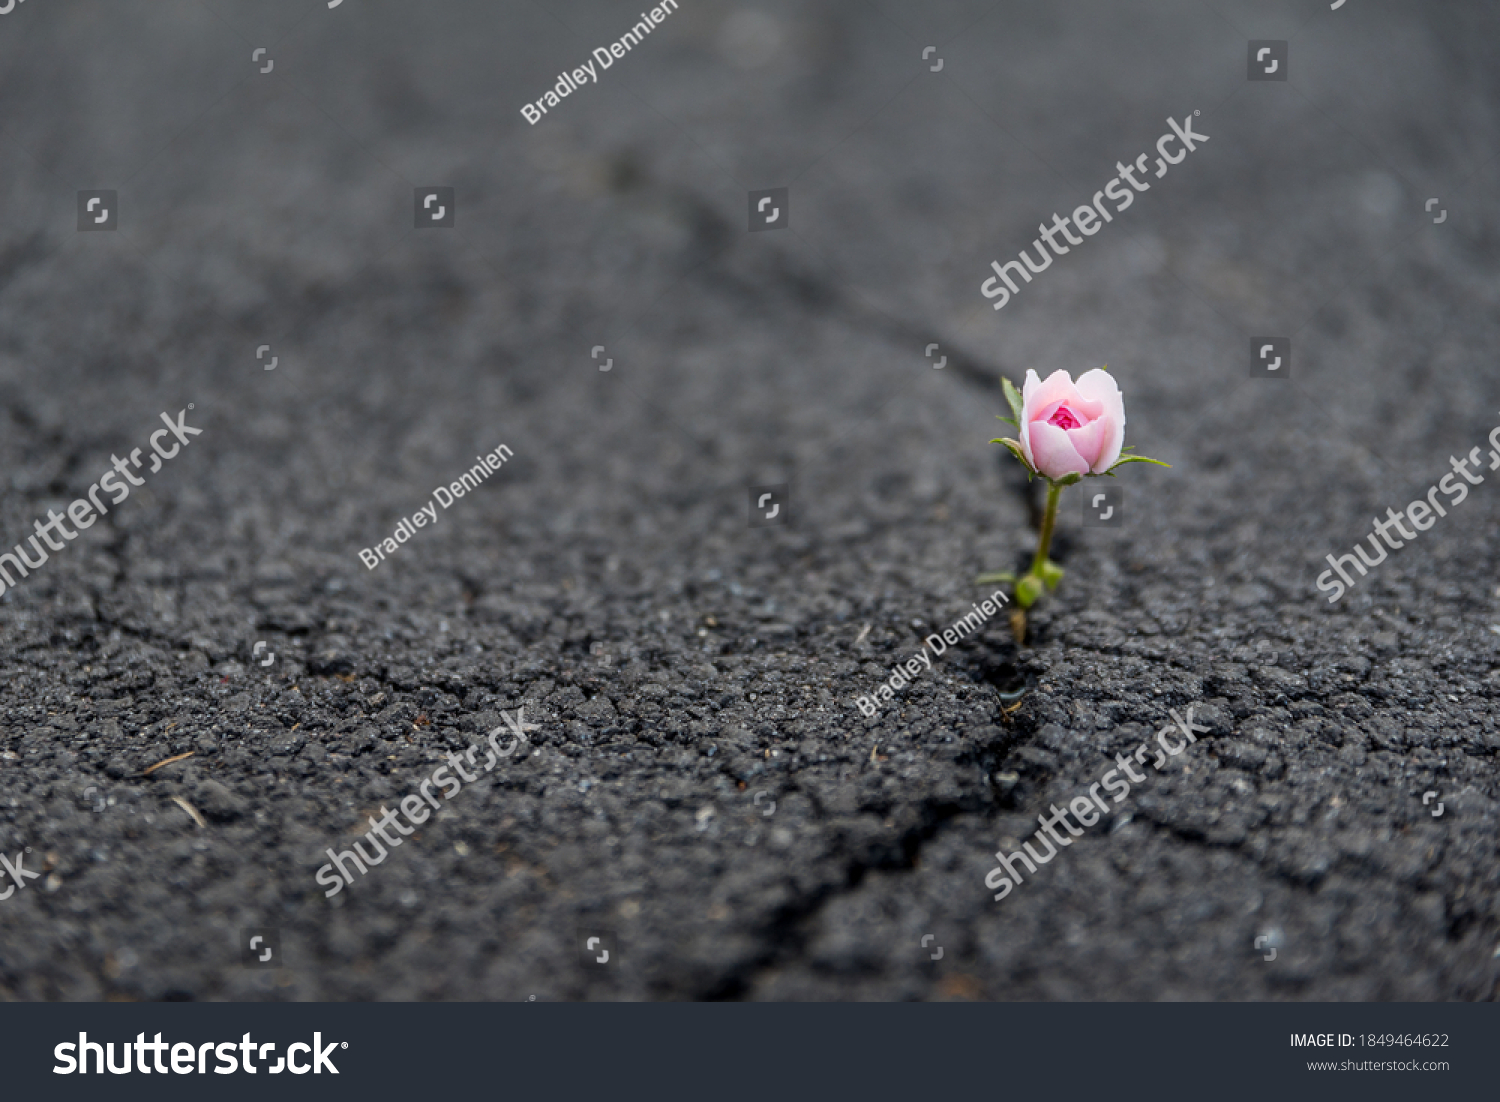 Strong and beautiful flower growing resiliently out of crack in dark asphalt #1849464622